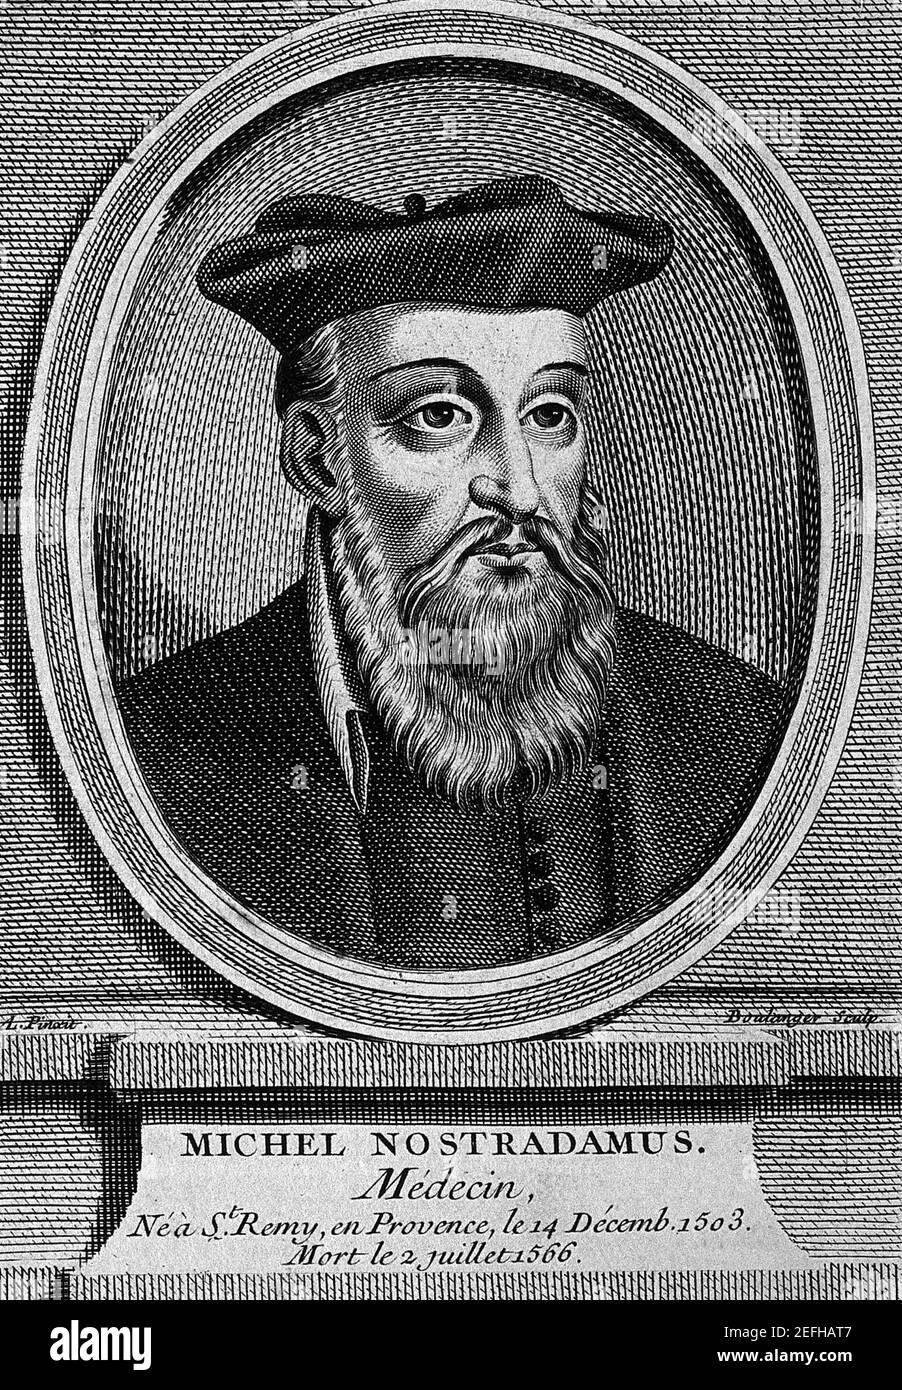 Michael Nostradamus (aka Michel de Nostredame) (born December 14, 1503, Saint-Rémy, France - died July 1/2, 1566, Salon) French astrologer, physician and reputed seer, who is best known for his book Les Prophéties, a collection of 942 poetic quatrains allegedly predicting future events. The book was first published in 1555. Line engraving by J. Boulanger / File Reference # 1003-859THA Stock Photo